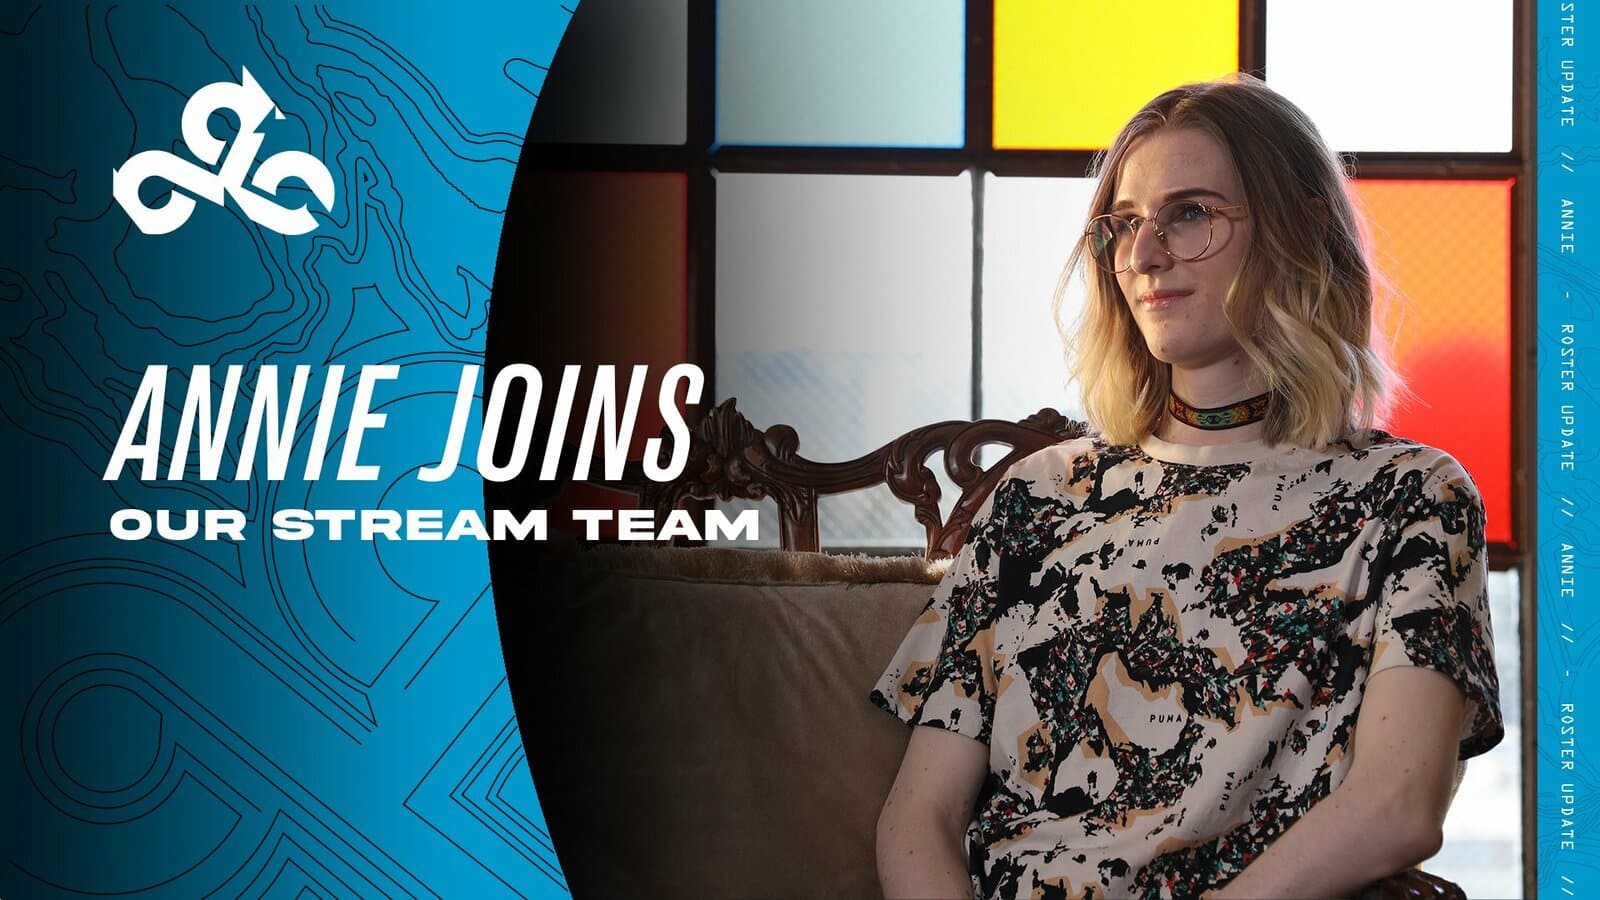 Annie in a graphic with cloud9's logo and colors